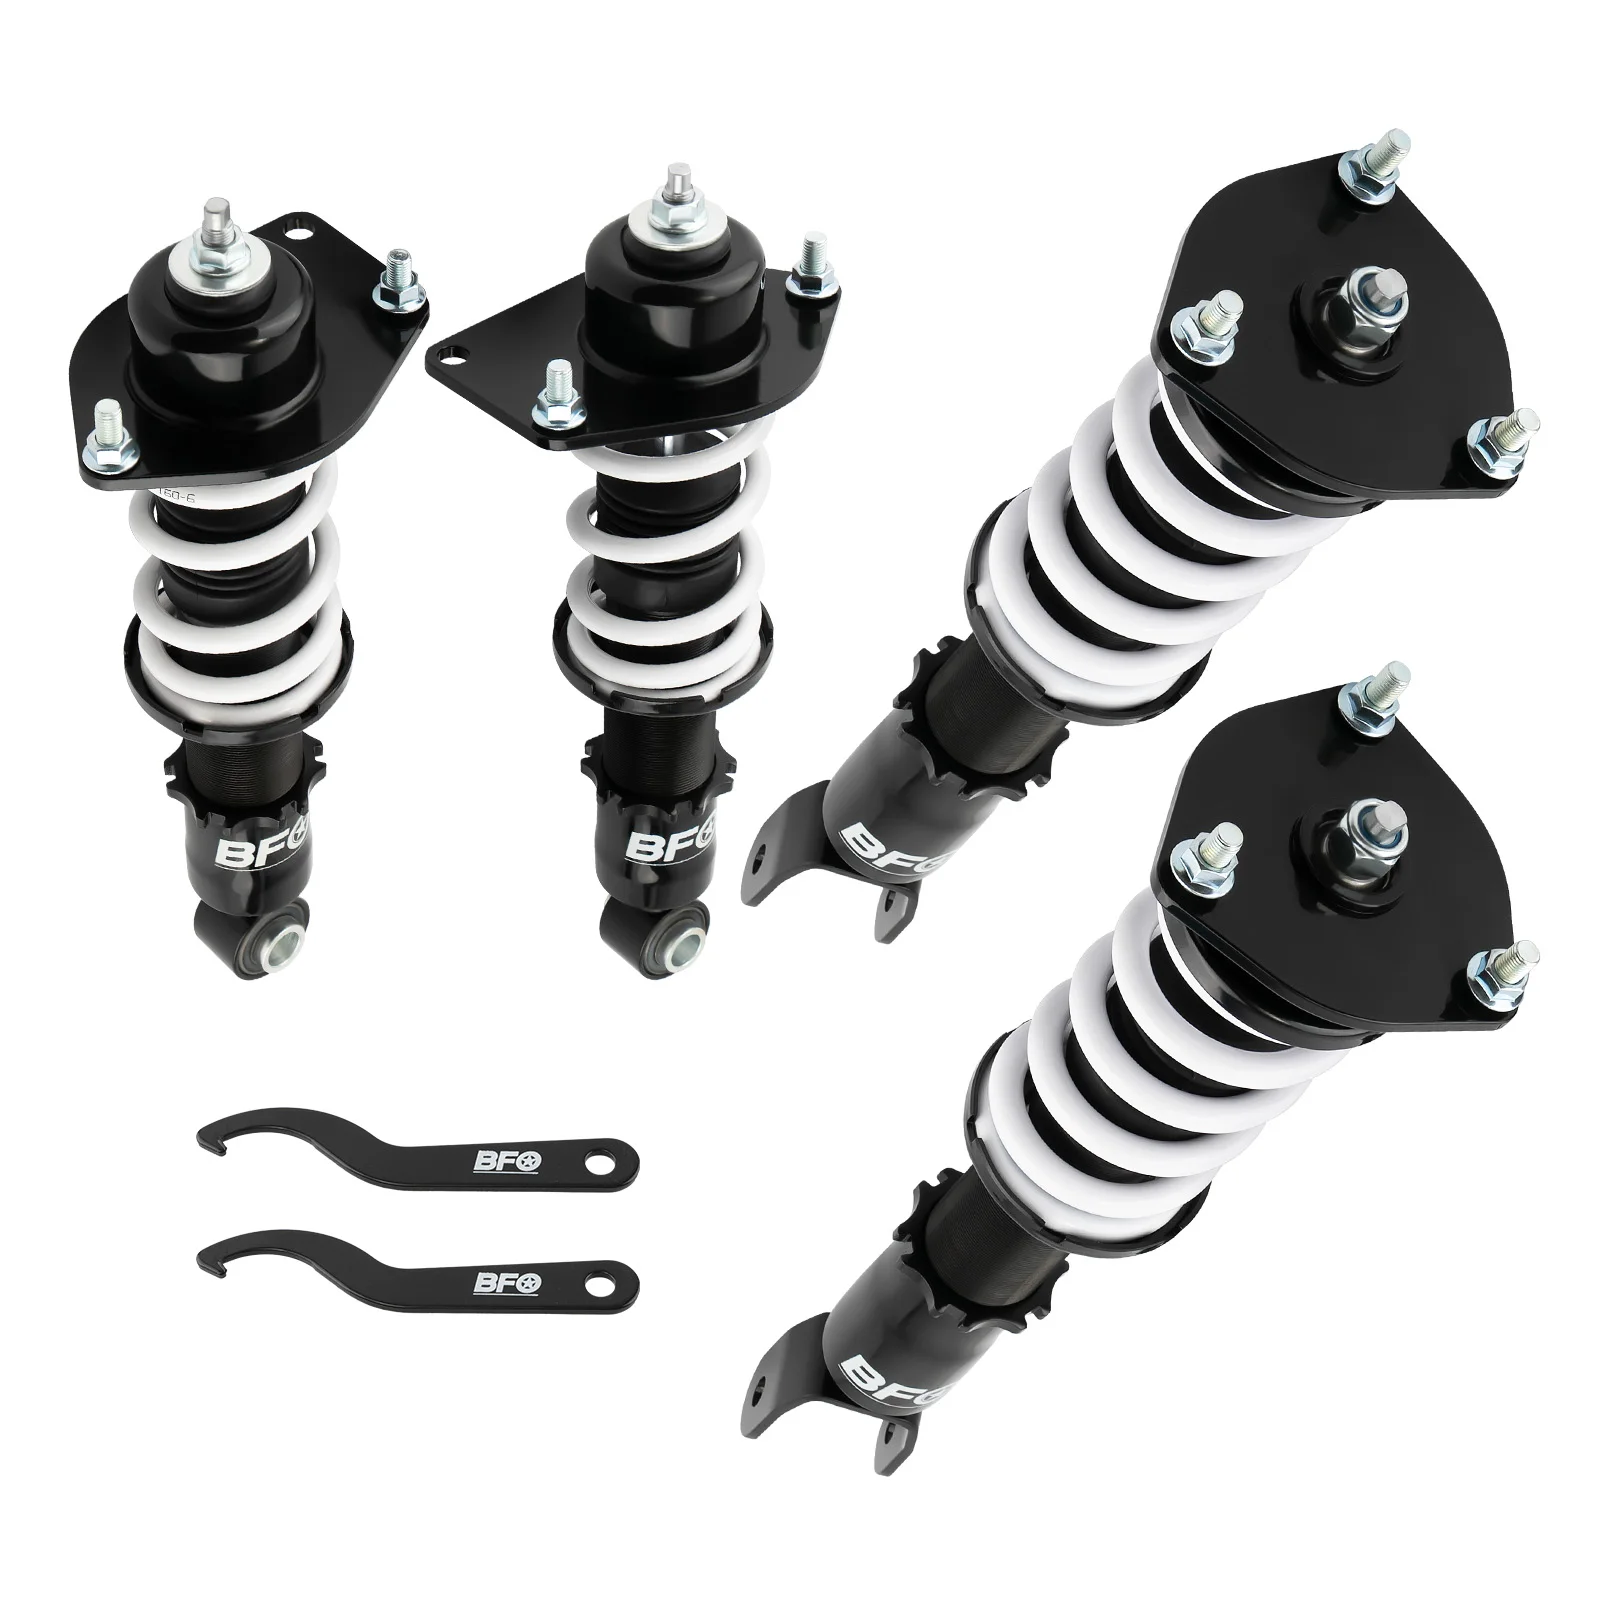 

Coilover Shocks Suspension Coil Spring Kit for Mazda RX8 RX-8 Coilover 2004-2011 Adjustable Height Coilovers Street Lowering